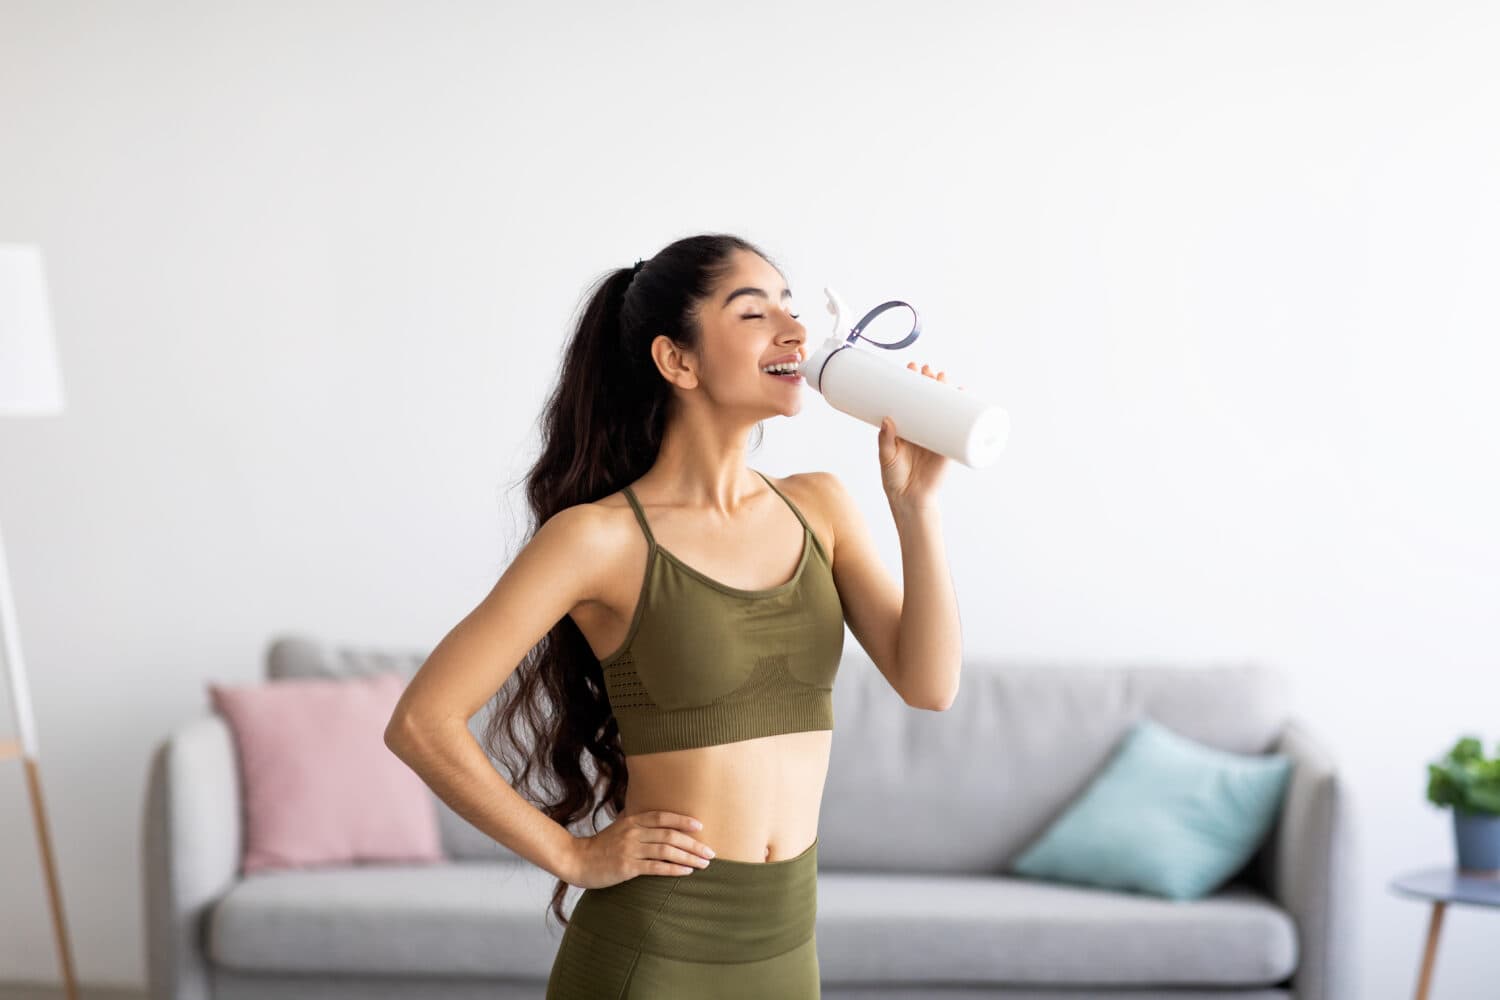 Pretty Indian woman in sports clothes drinking water or protein shake from bottle at home. Millennial Asian lady losing weight, keeping hydrated after workout, taking care of her body indoors